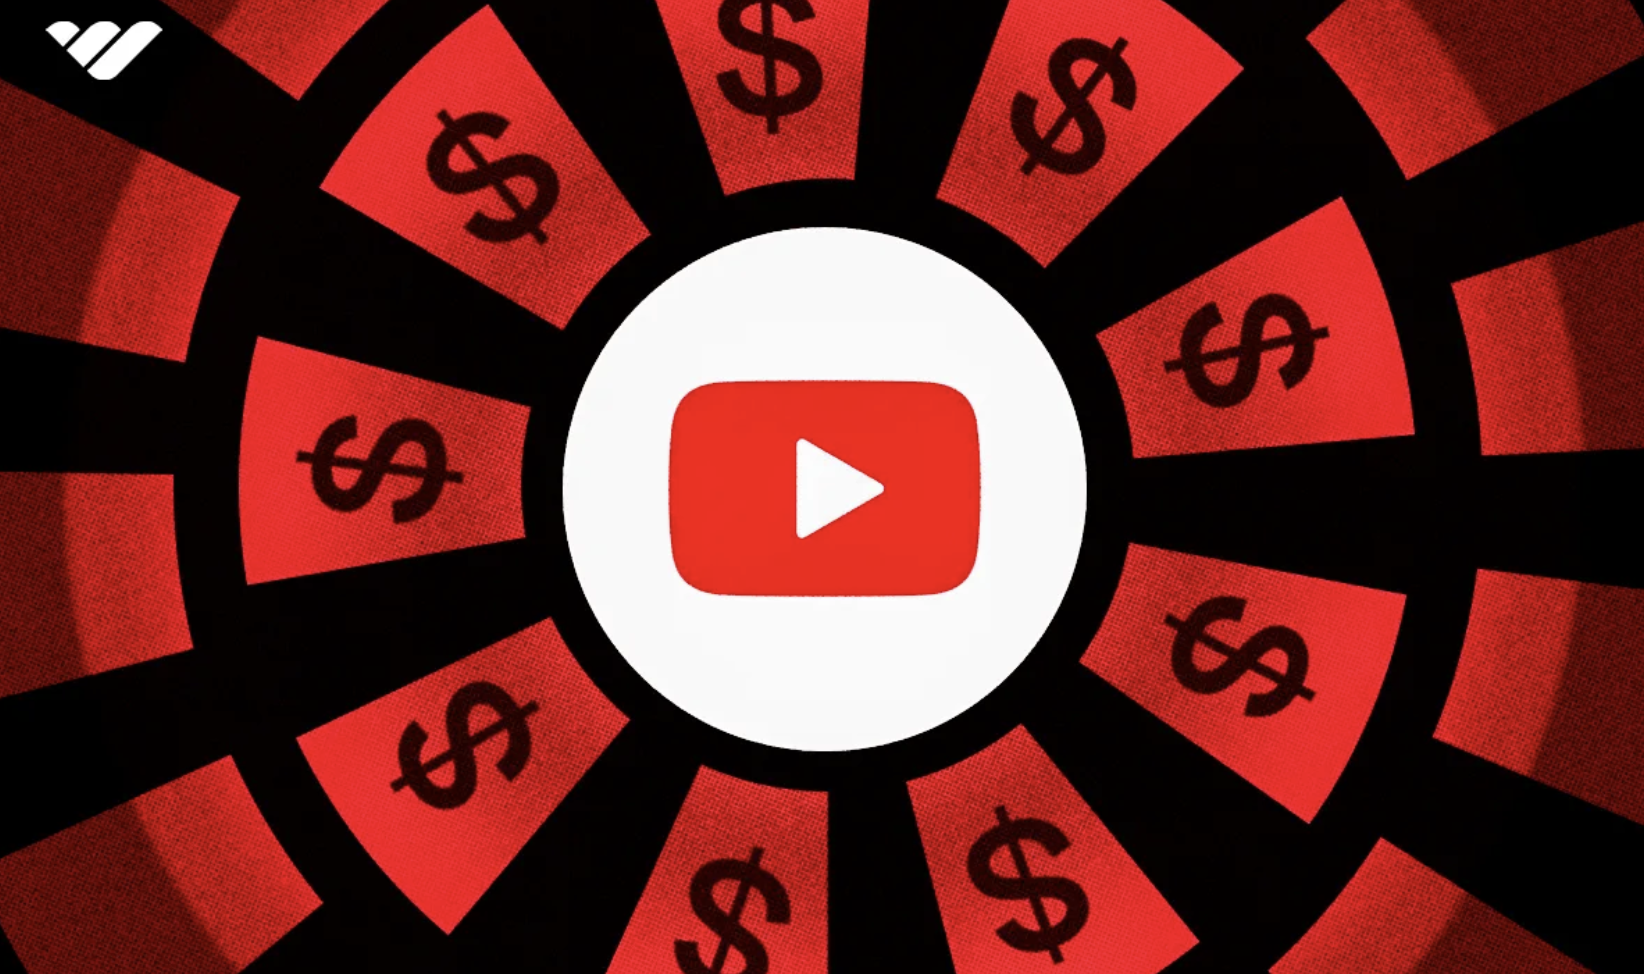 How to Monetize YouTube: 8 Ways You Can Make Money With a YouTube Channel